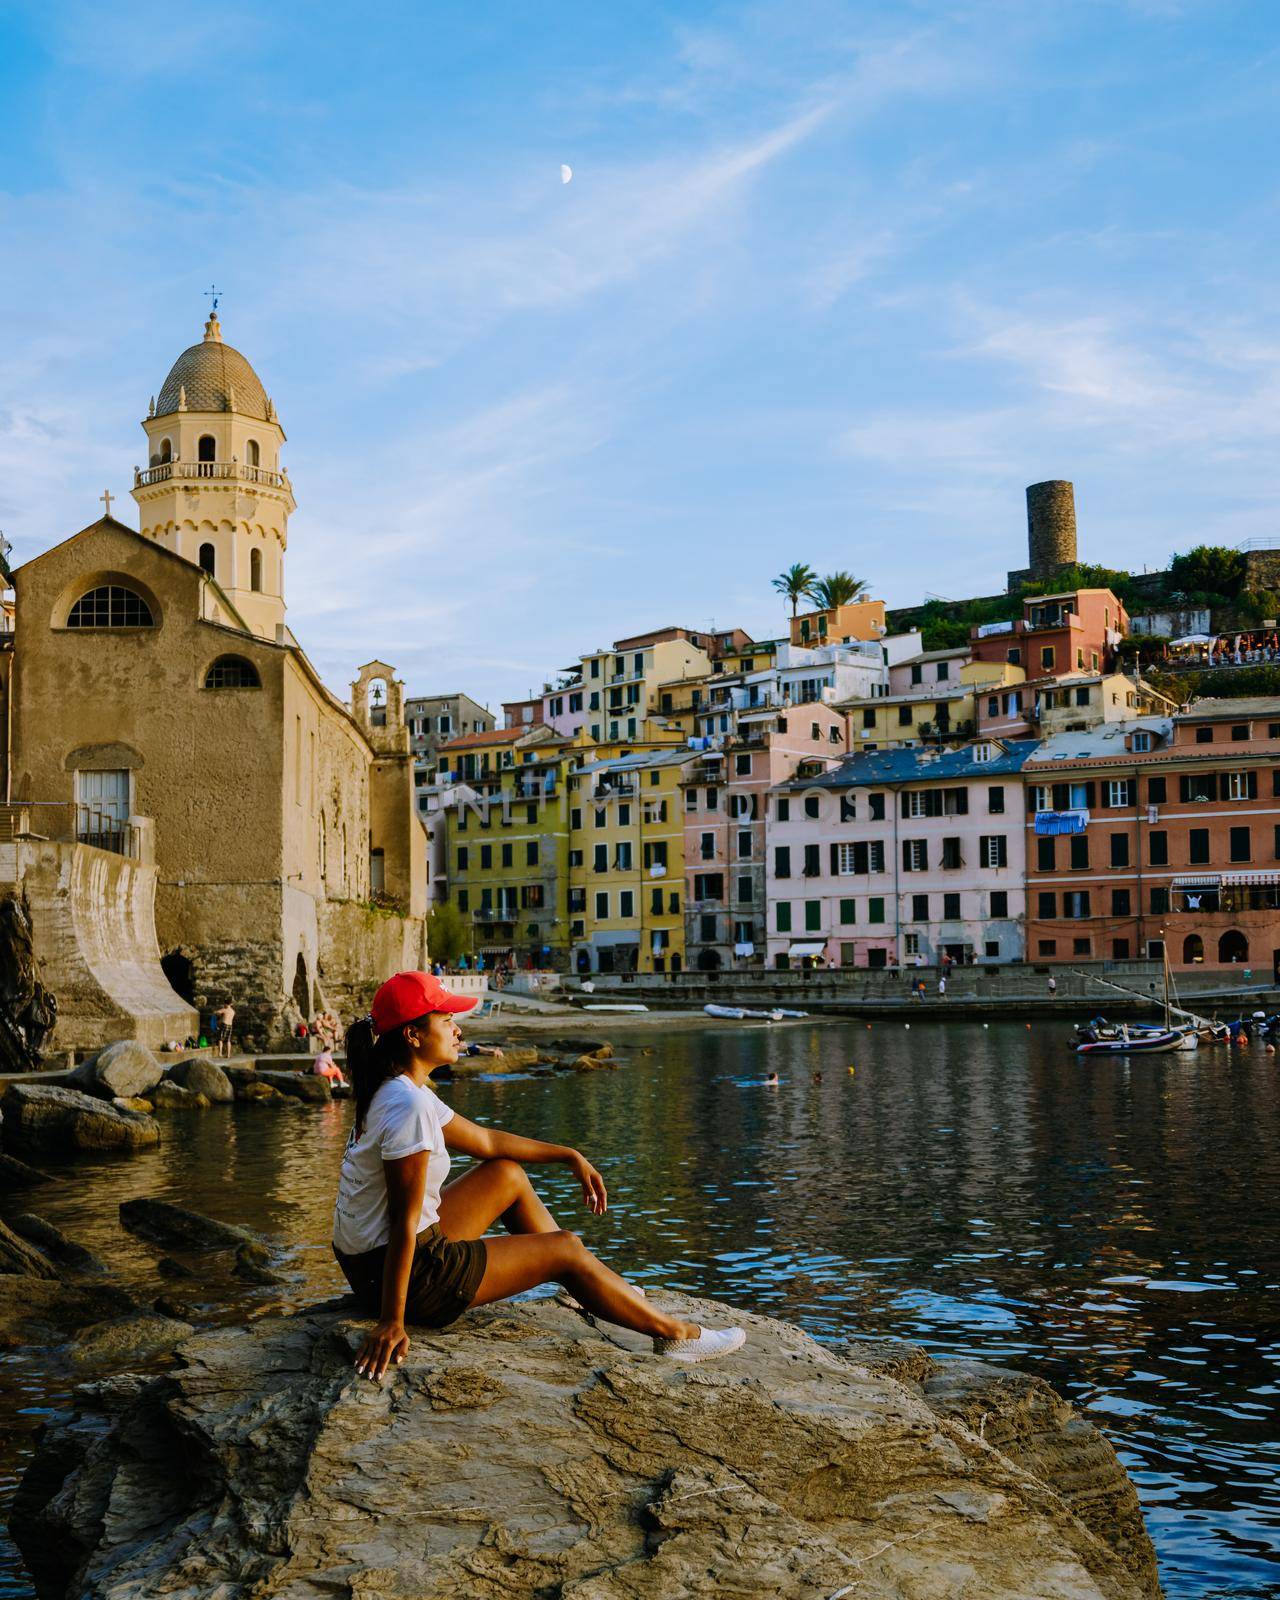 Cinque Terre, Italy, The picturesque coastal village of Vernazza, Cinque Terre, Italy woman watching sunset